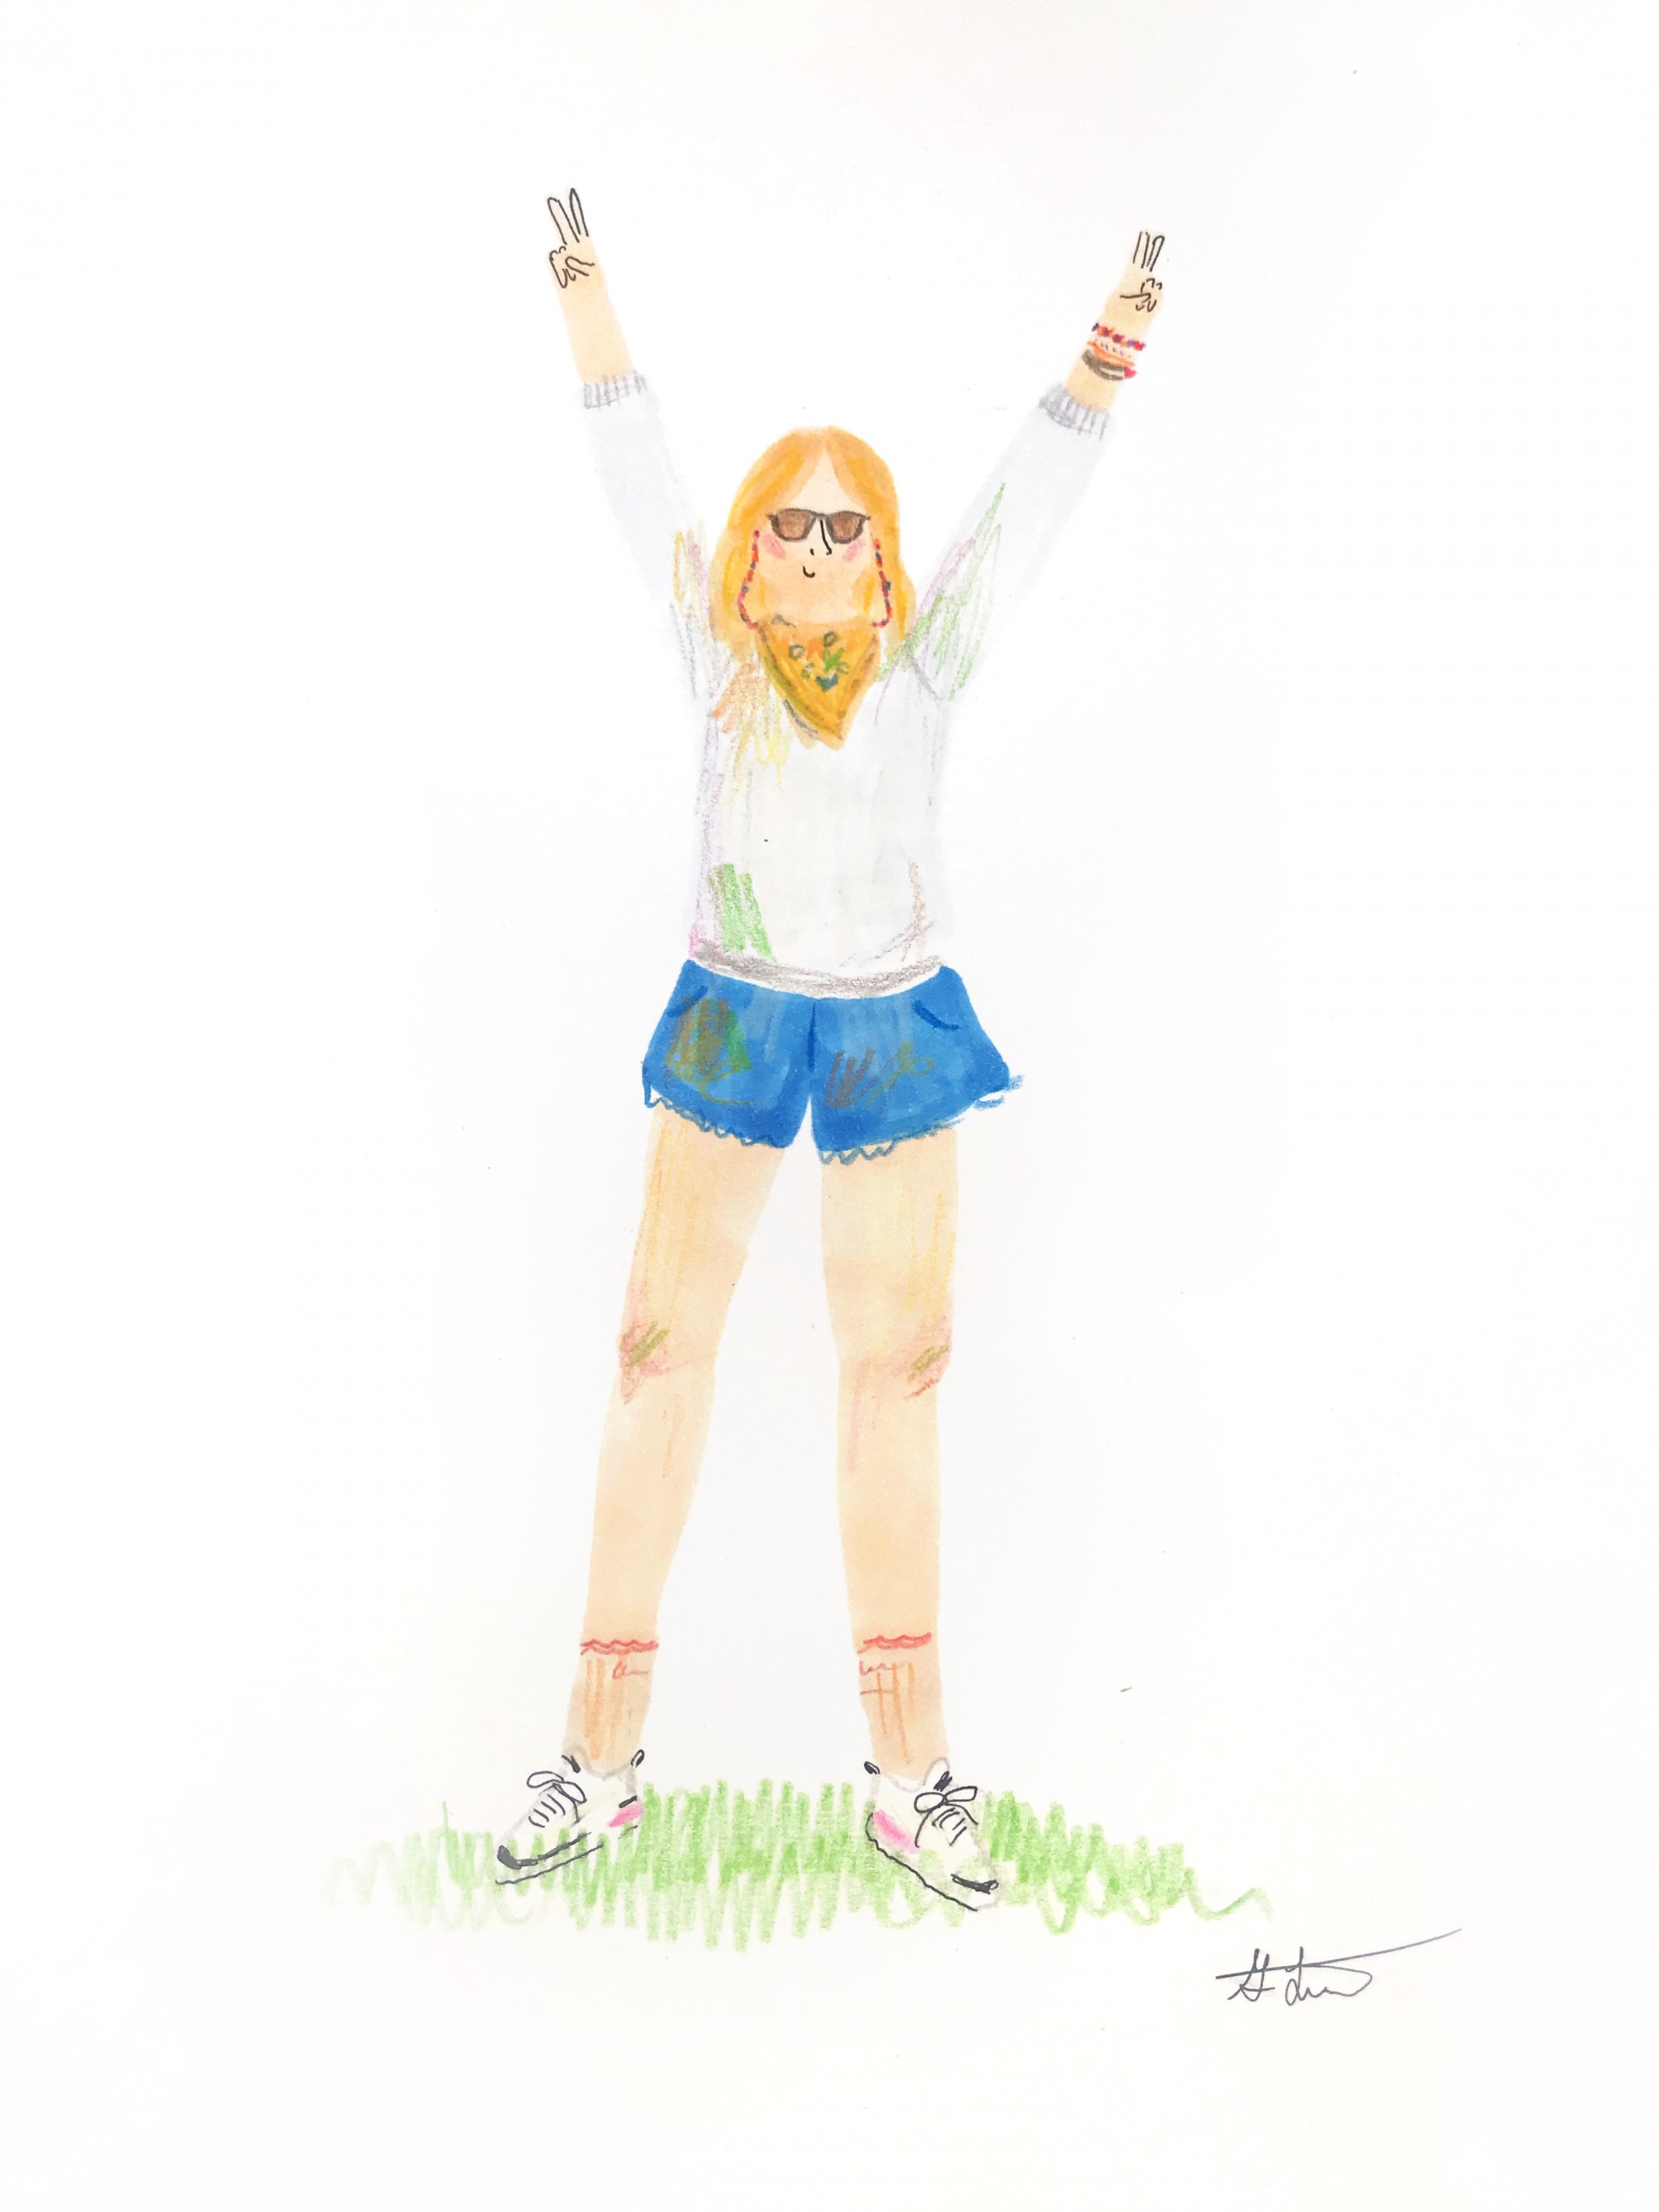 Full body drawing of girl with jean shorts, yellow bandana around neck, sunglasses. Both hands are above head in peace signs. 